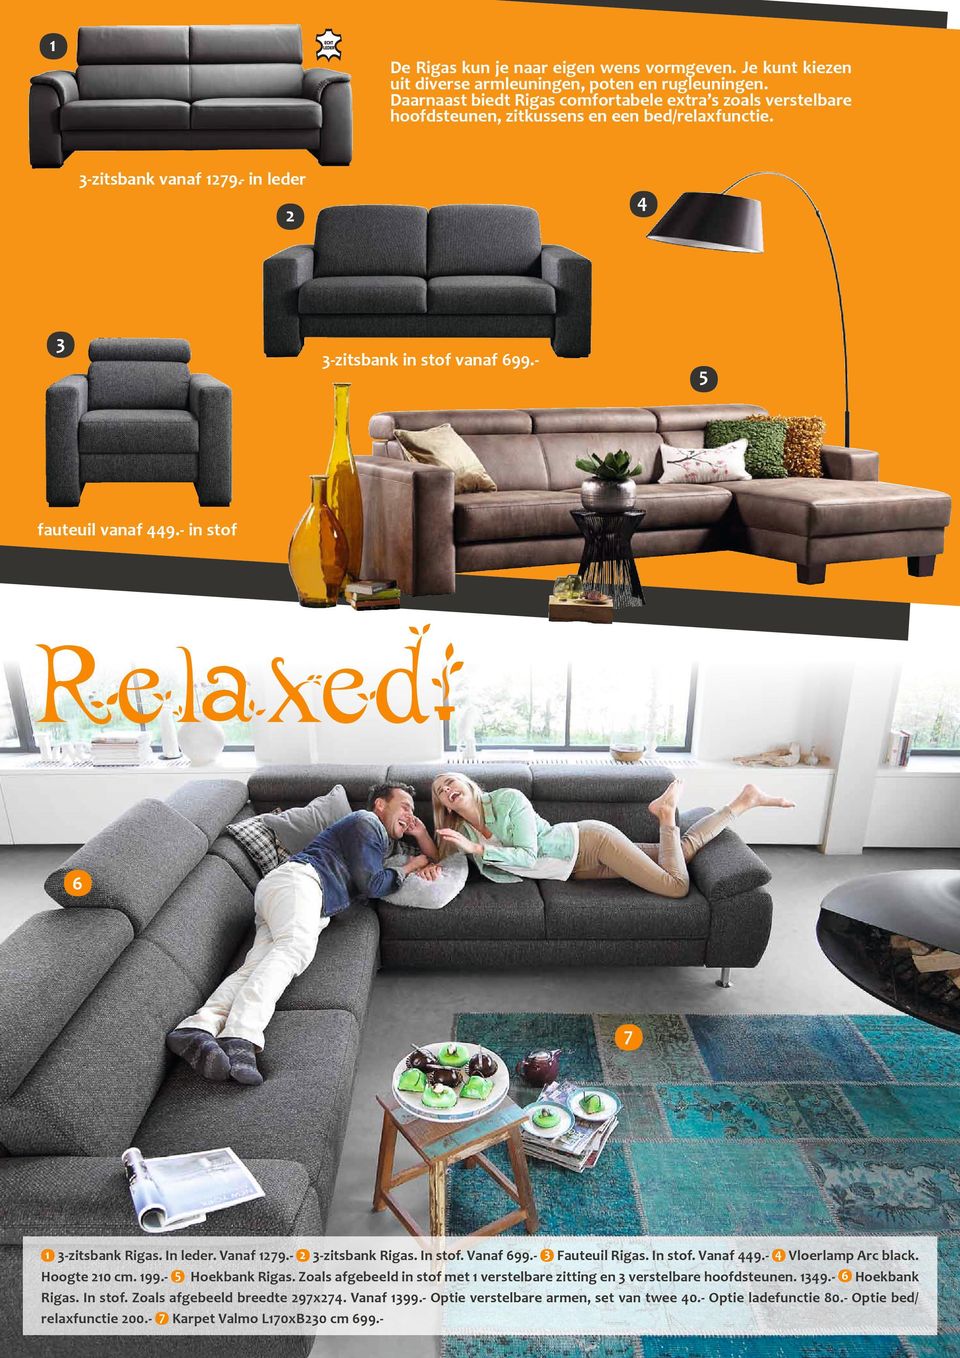 - 5 fauteuil vanaf 449.- in stof Relaxed! 6 7 1 3-zitsbank Rigas. In leder. Vanaf 1279.- 2 3-zitsbank Rigas. In stof. Vanaf 699.- 3 Fauteuil Rigas. In stof. Vanaf 449.- 4 Vloerlamp Arc black.